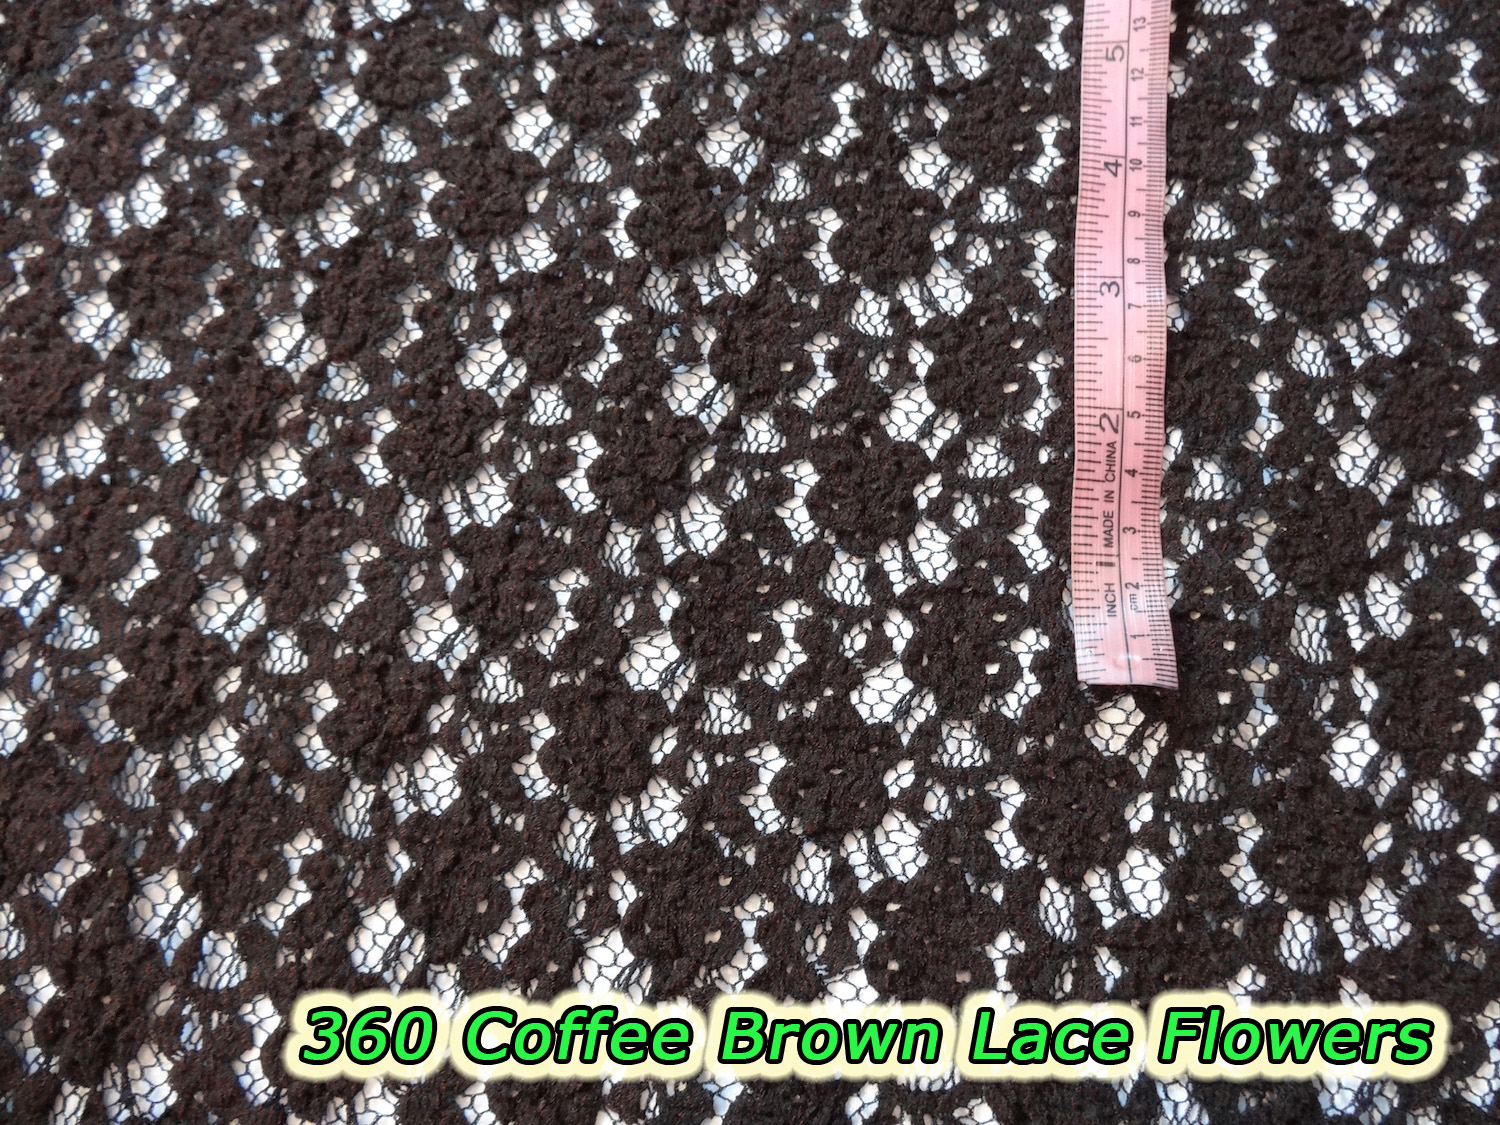 360 Coffee Brown Lace Flowers